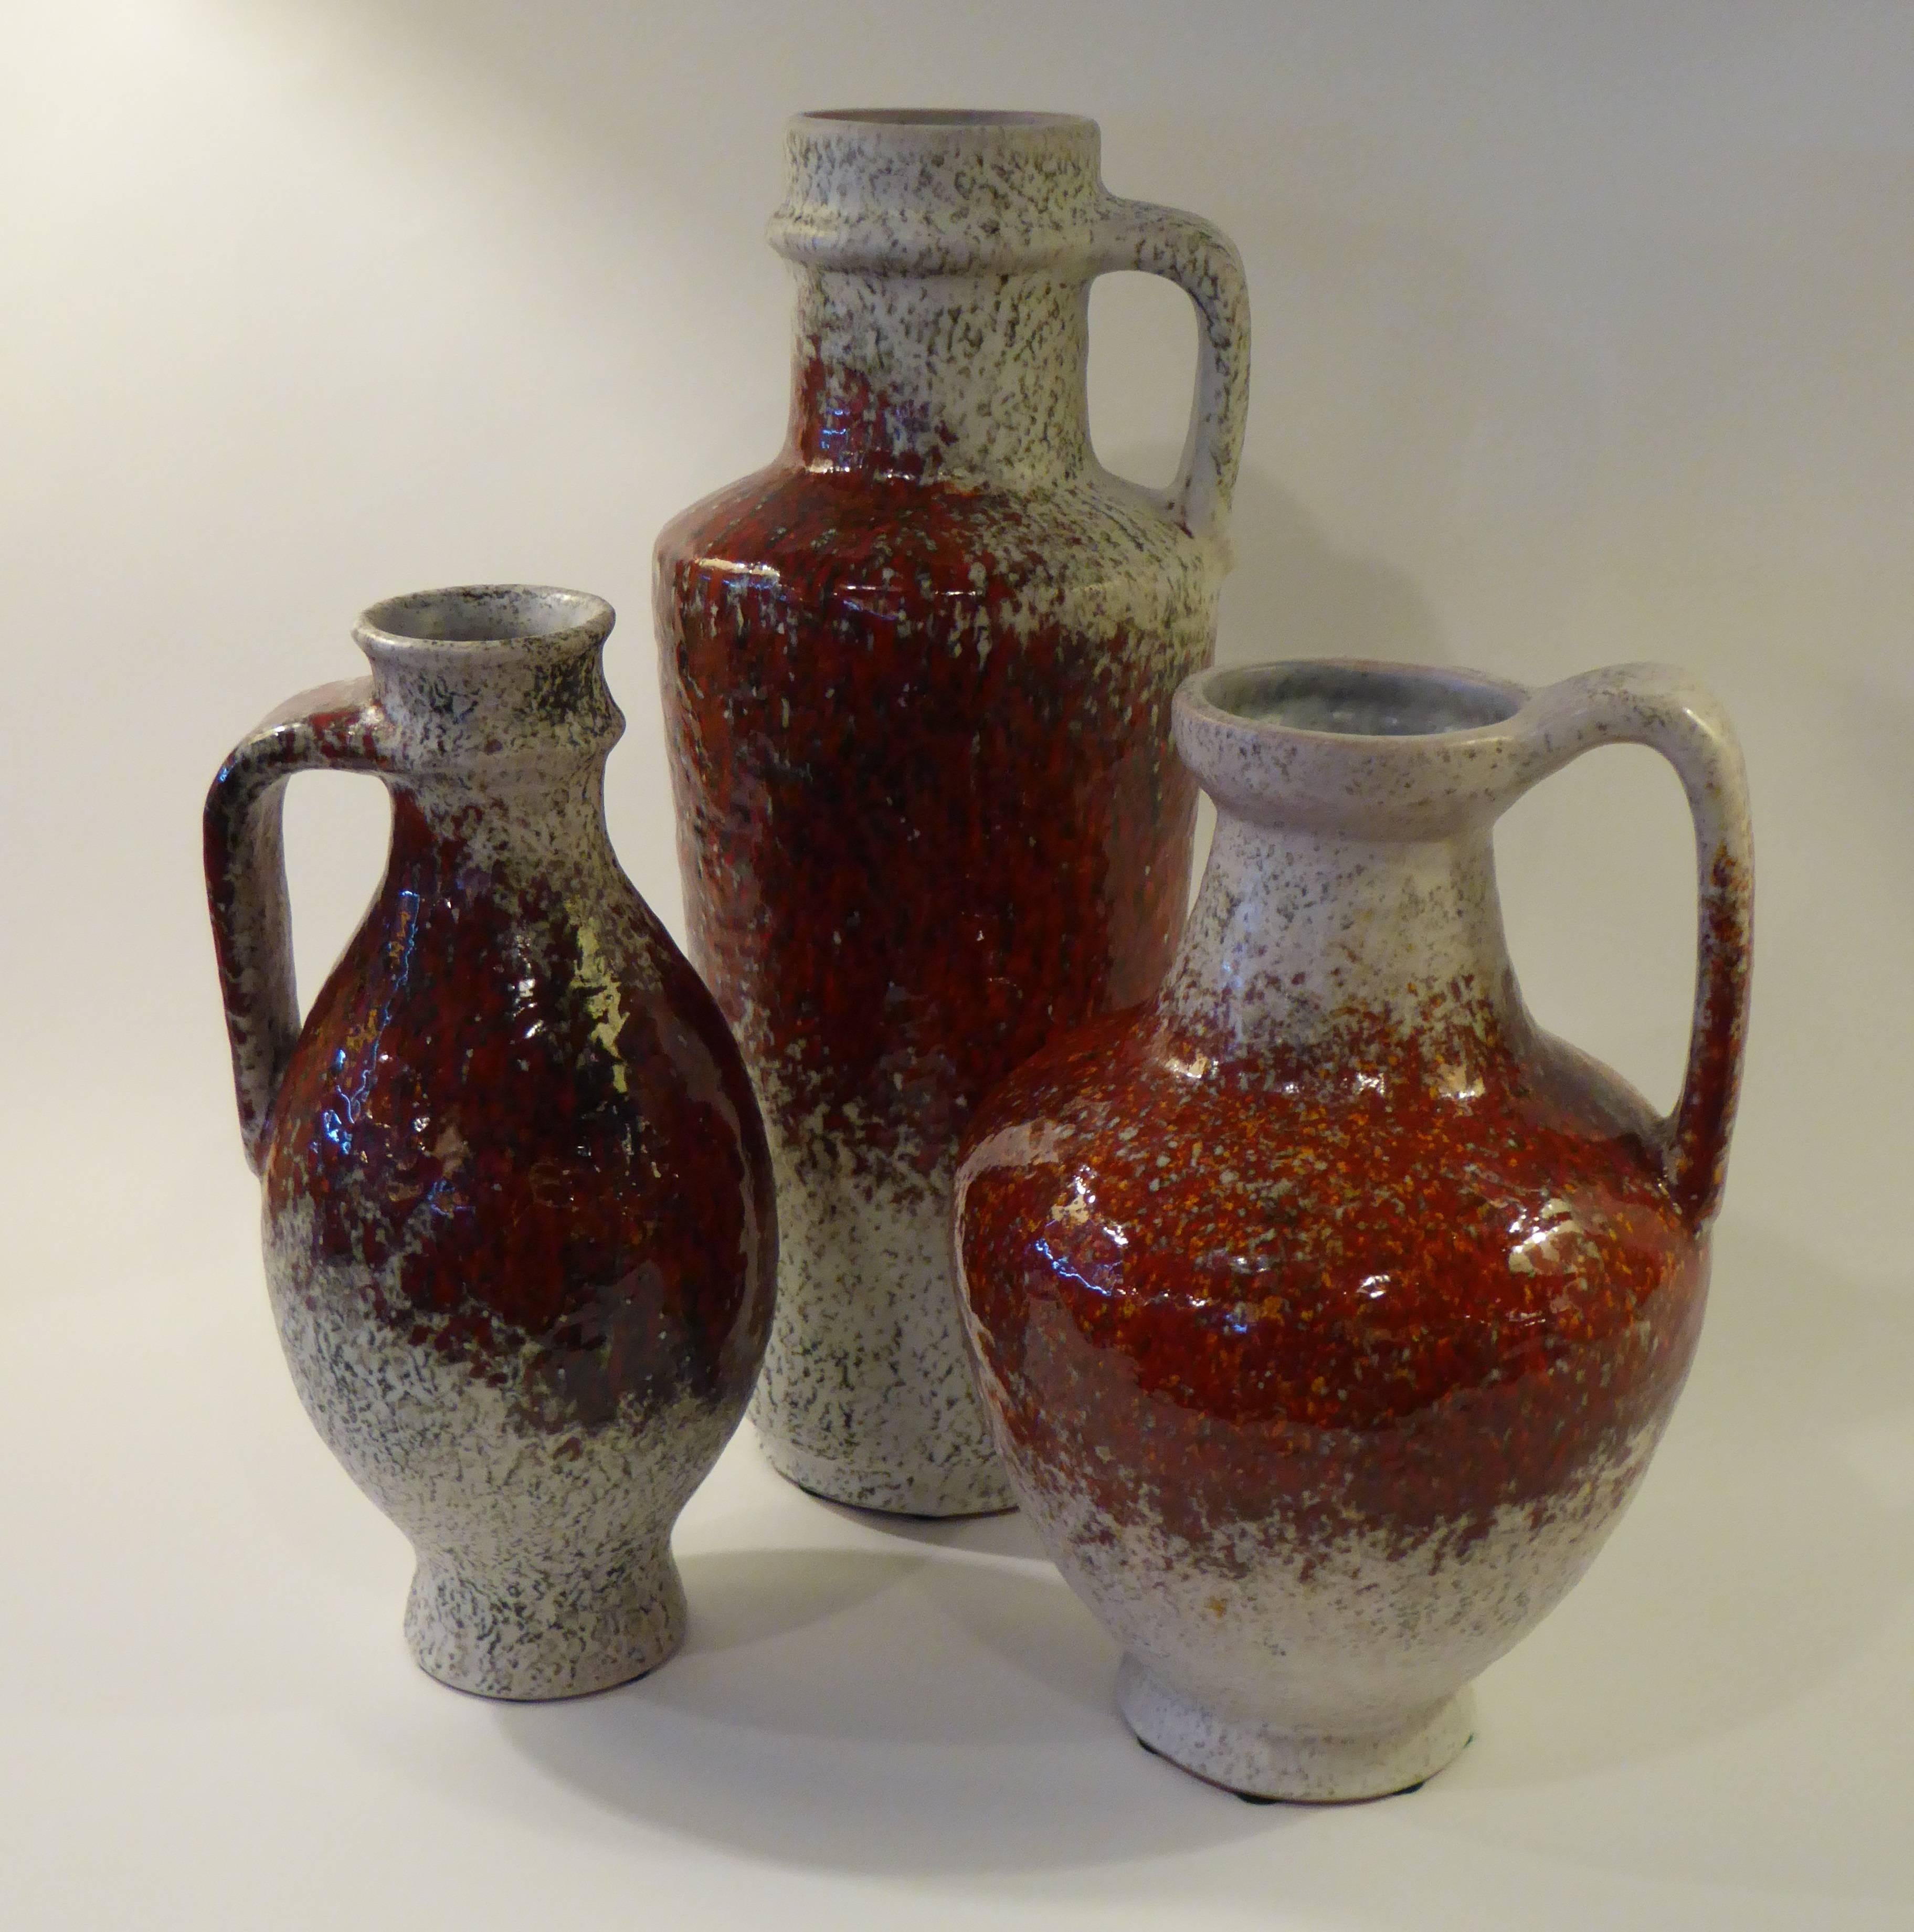 REDUCED FROM $1,250....Magnificent grouping of large krug form pottery vases by noted German potter Friedegart Glatzle for Karlsruhe. Three handled vases with a rich 